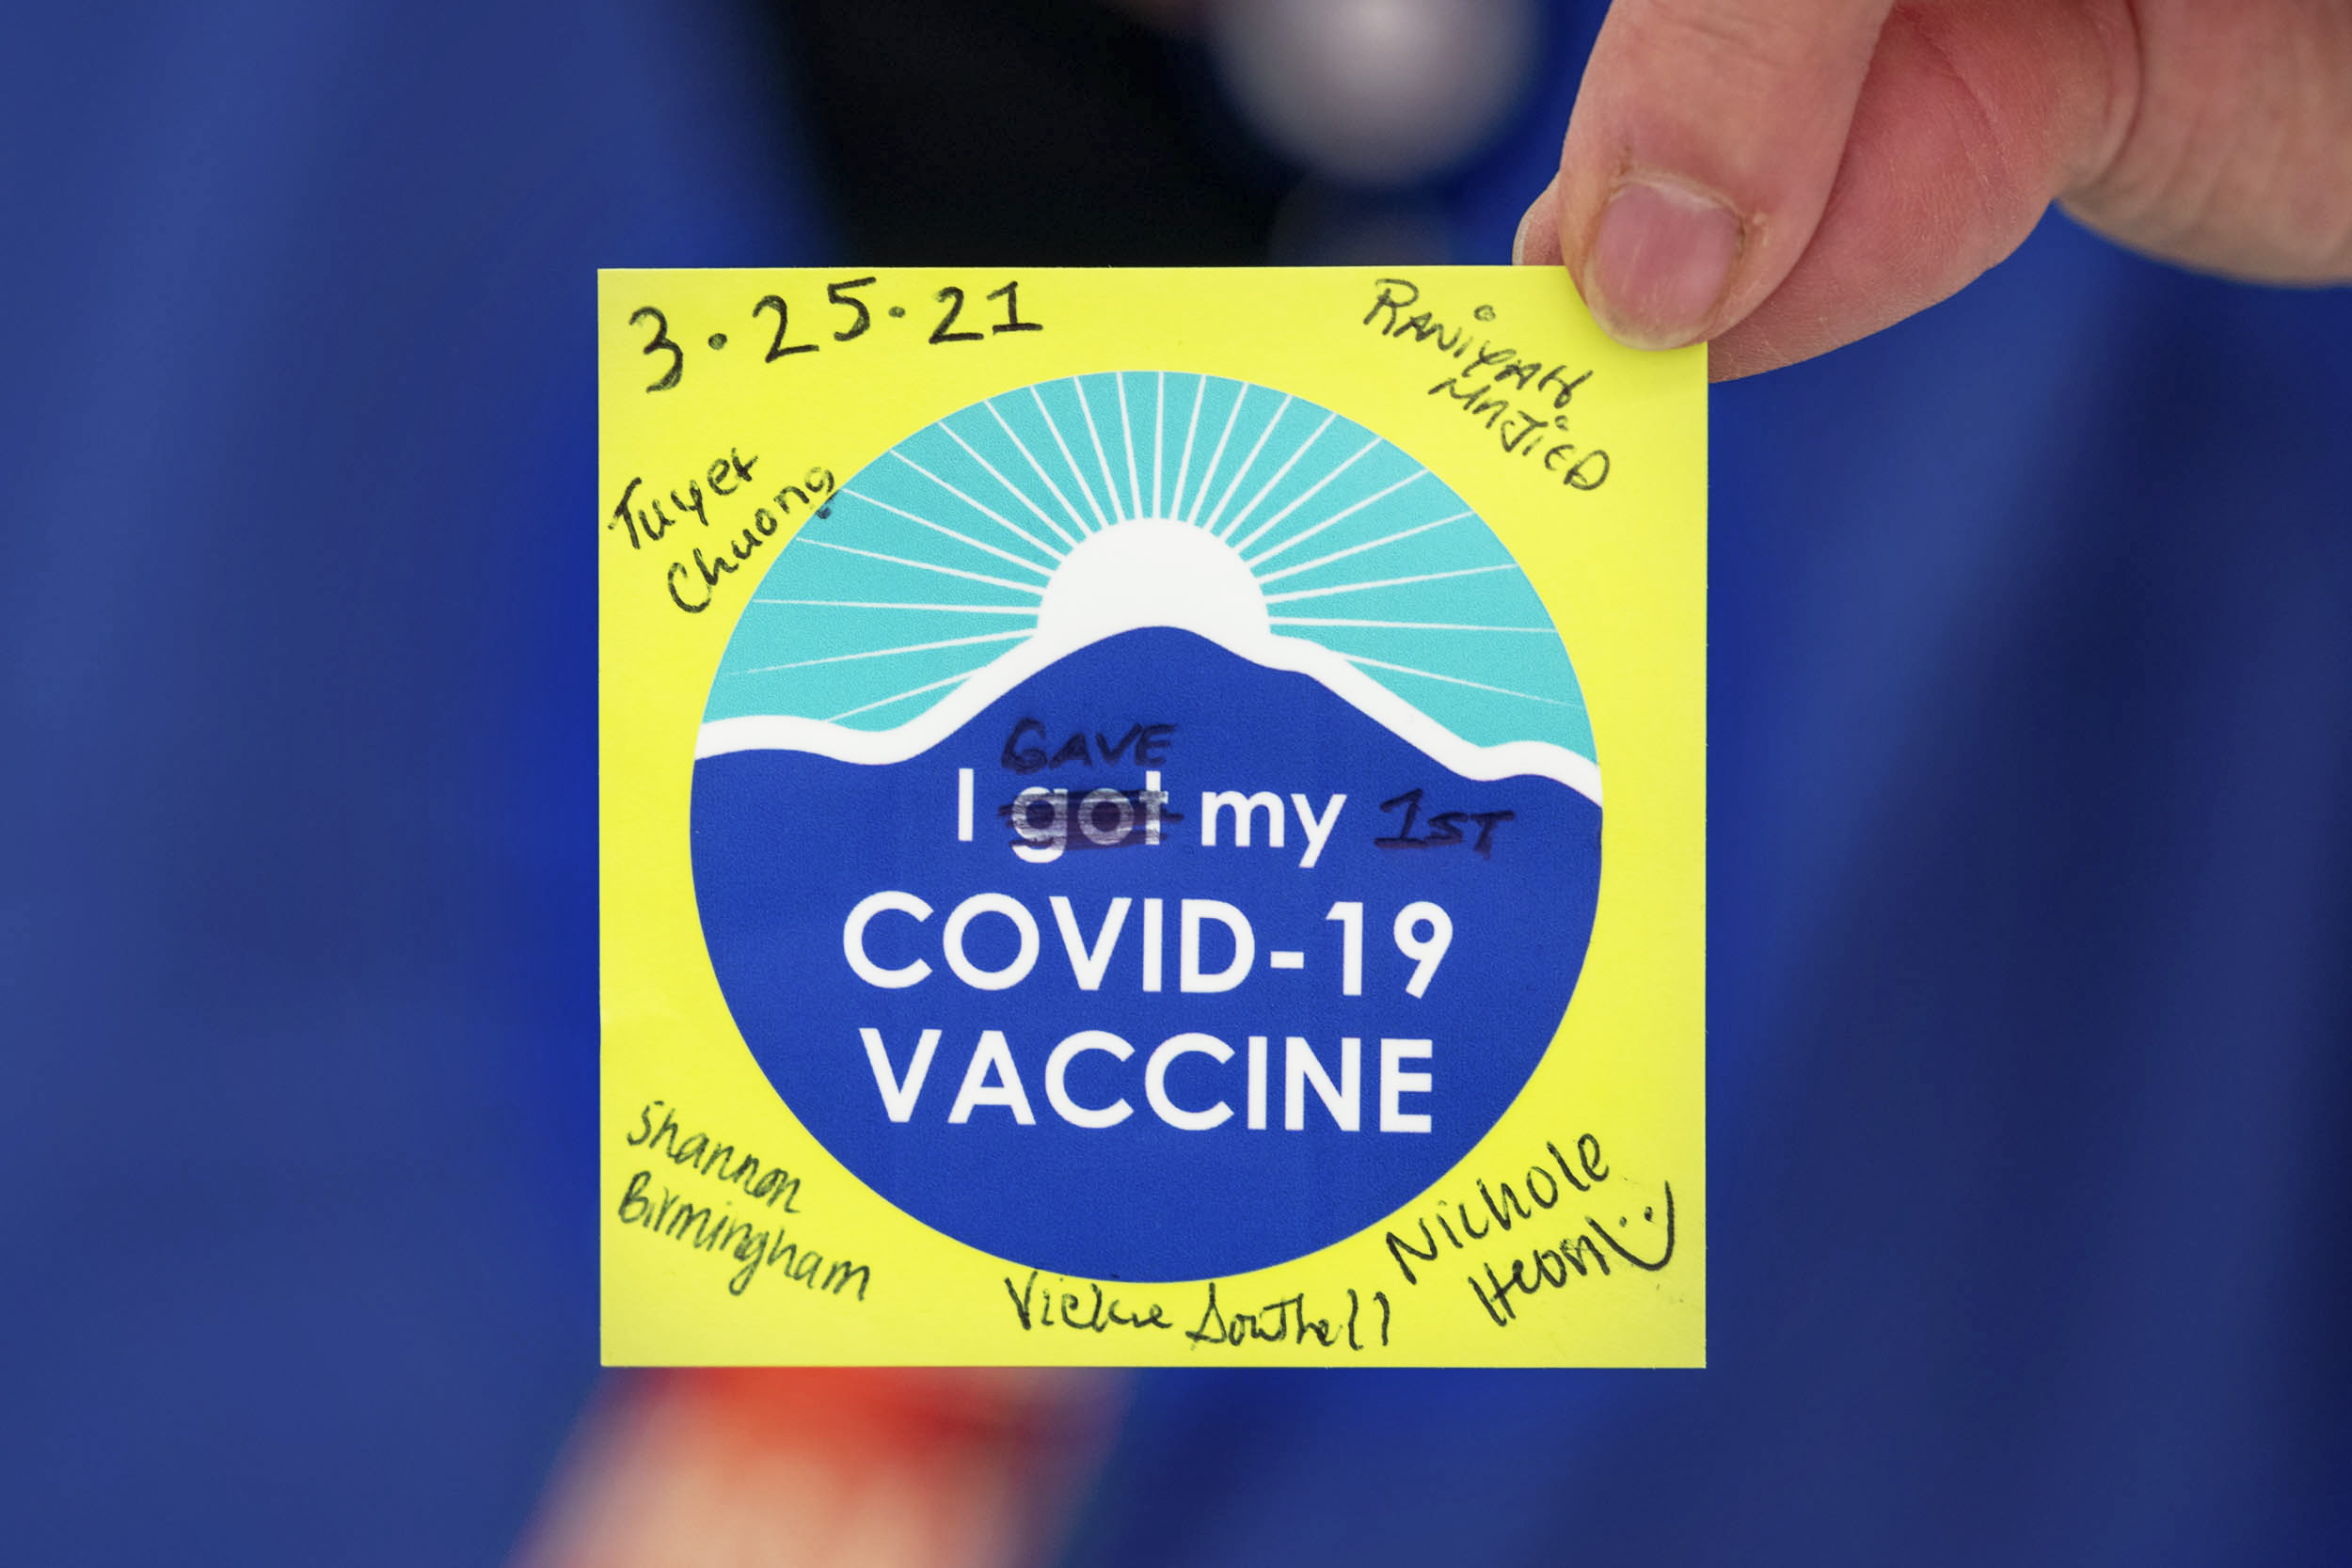 signed stickers with date and the sticker reads I gave my 1st covid-19 vaccine